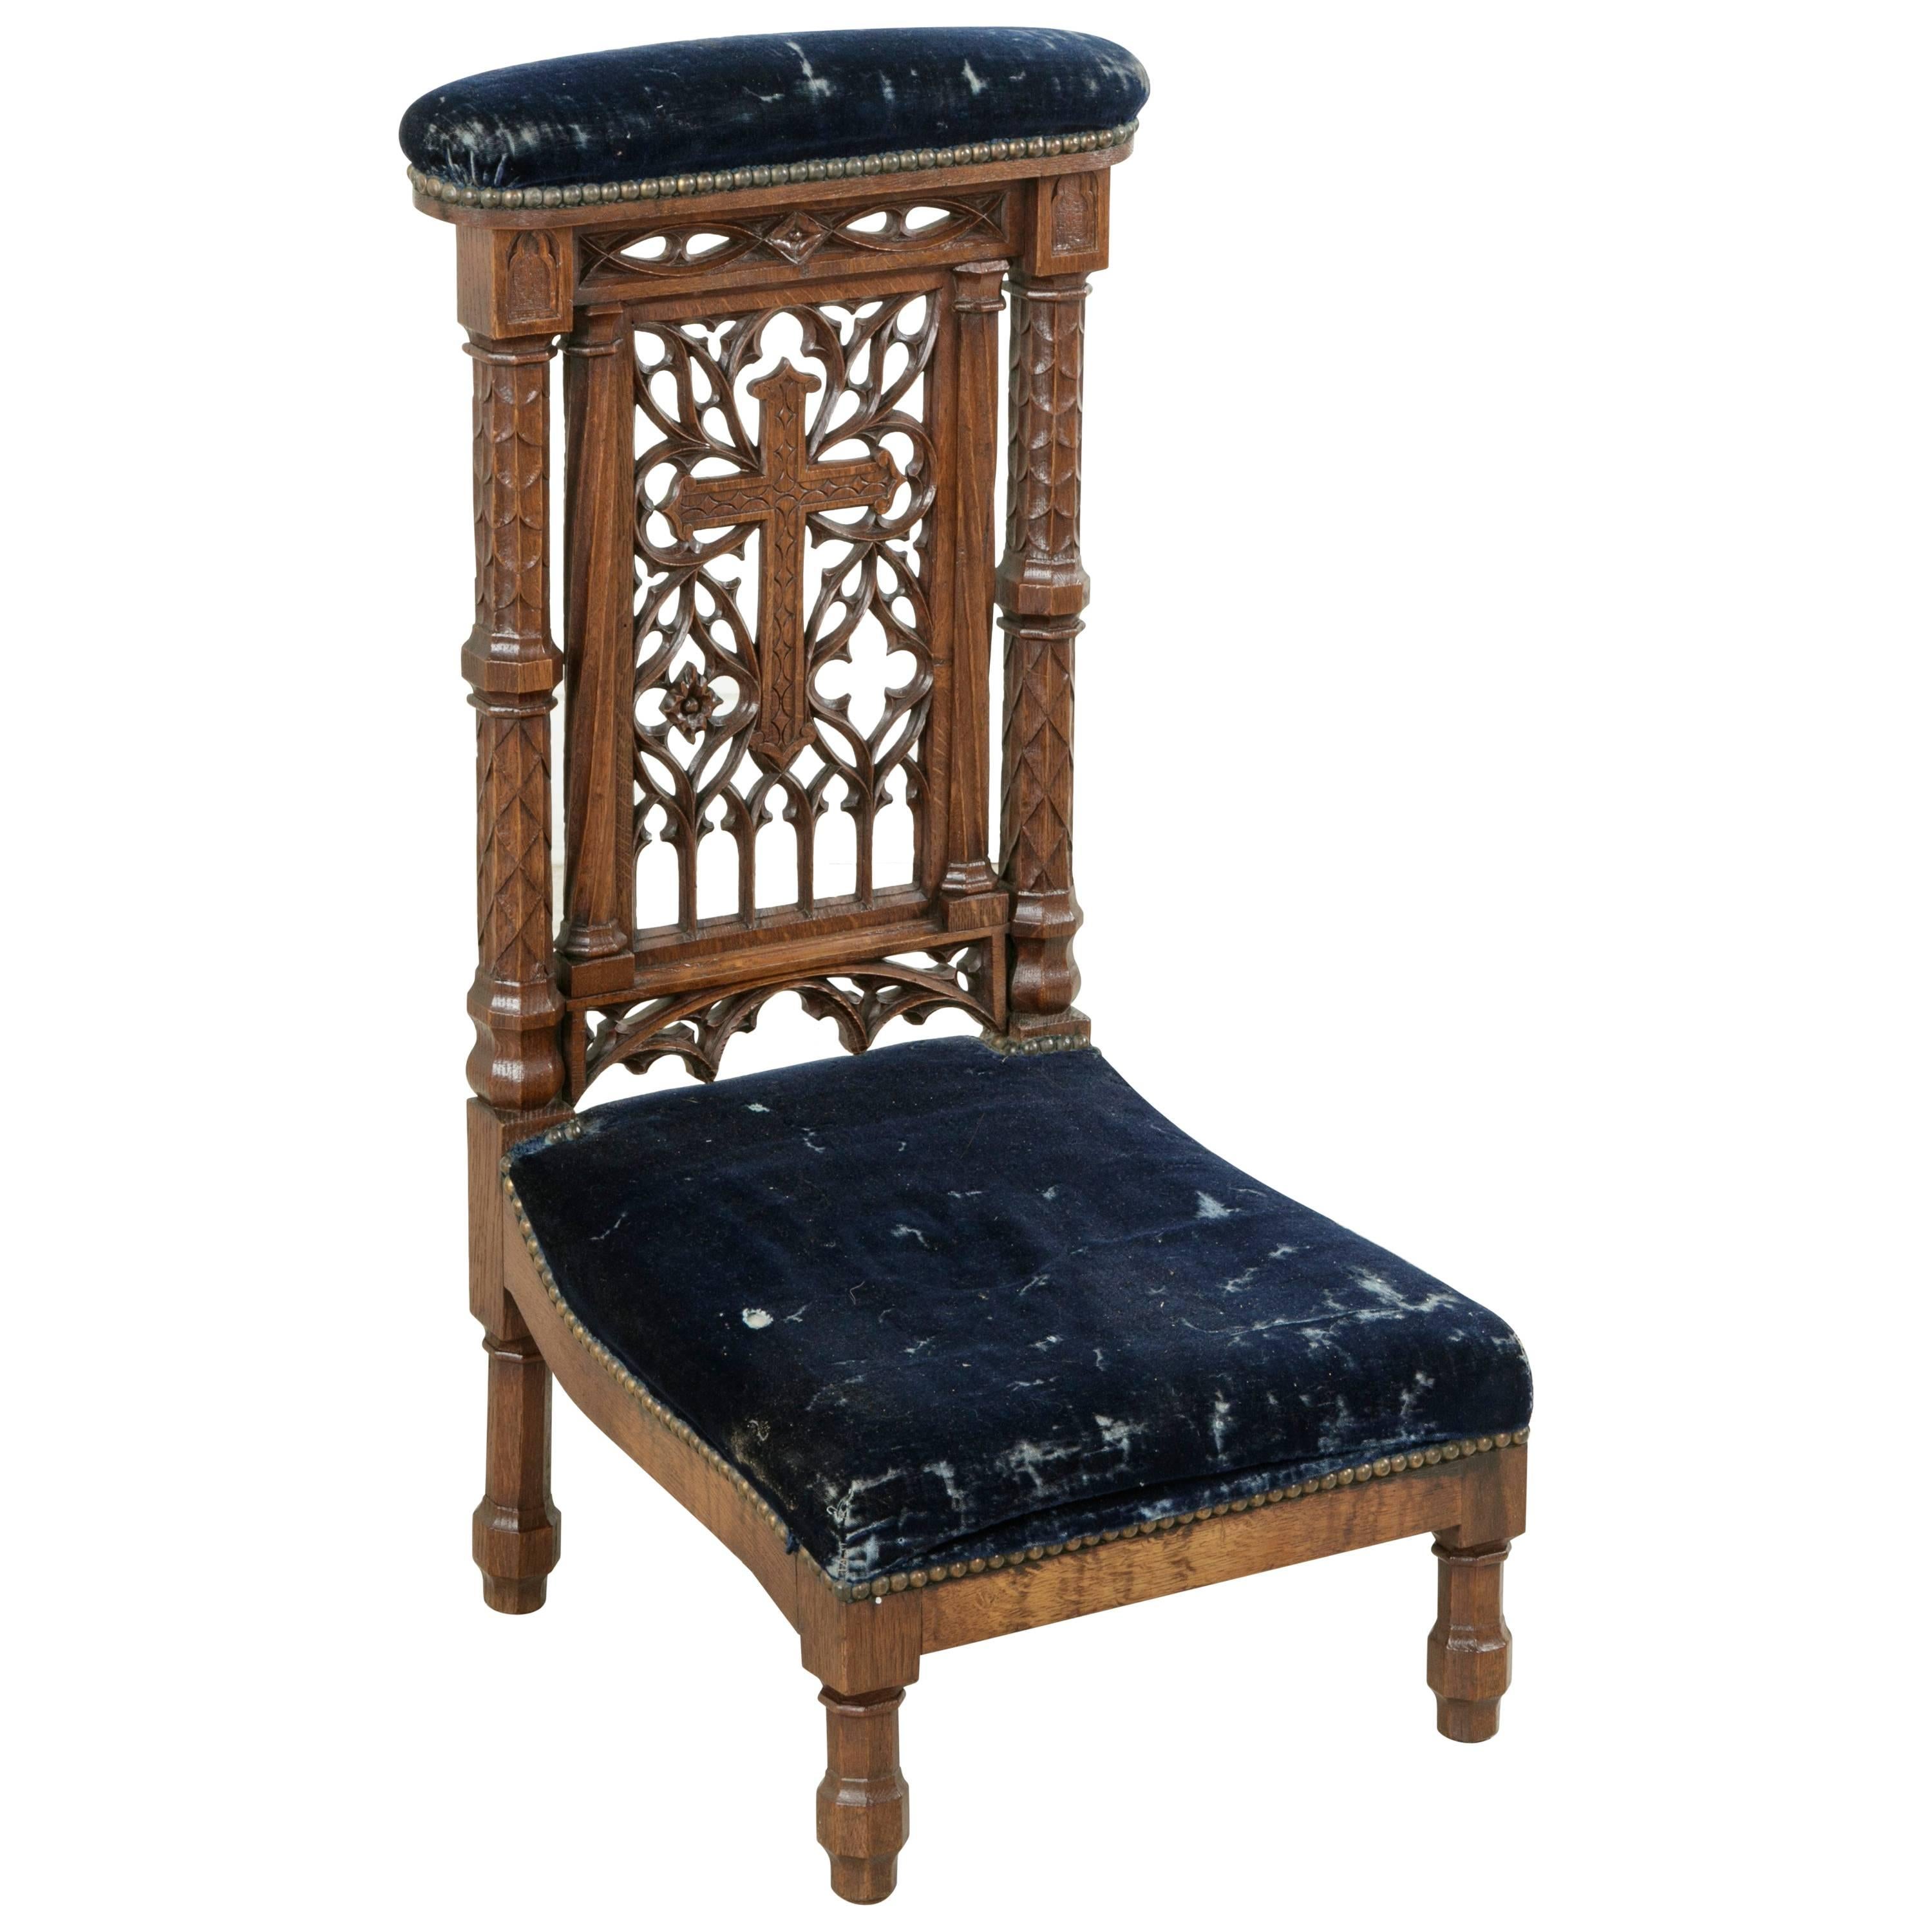 Late 19th Century French Hand-Carved Oak Prie-Dieu or Prayer Chair with Cross